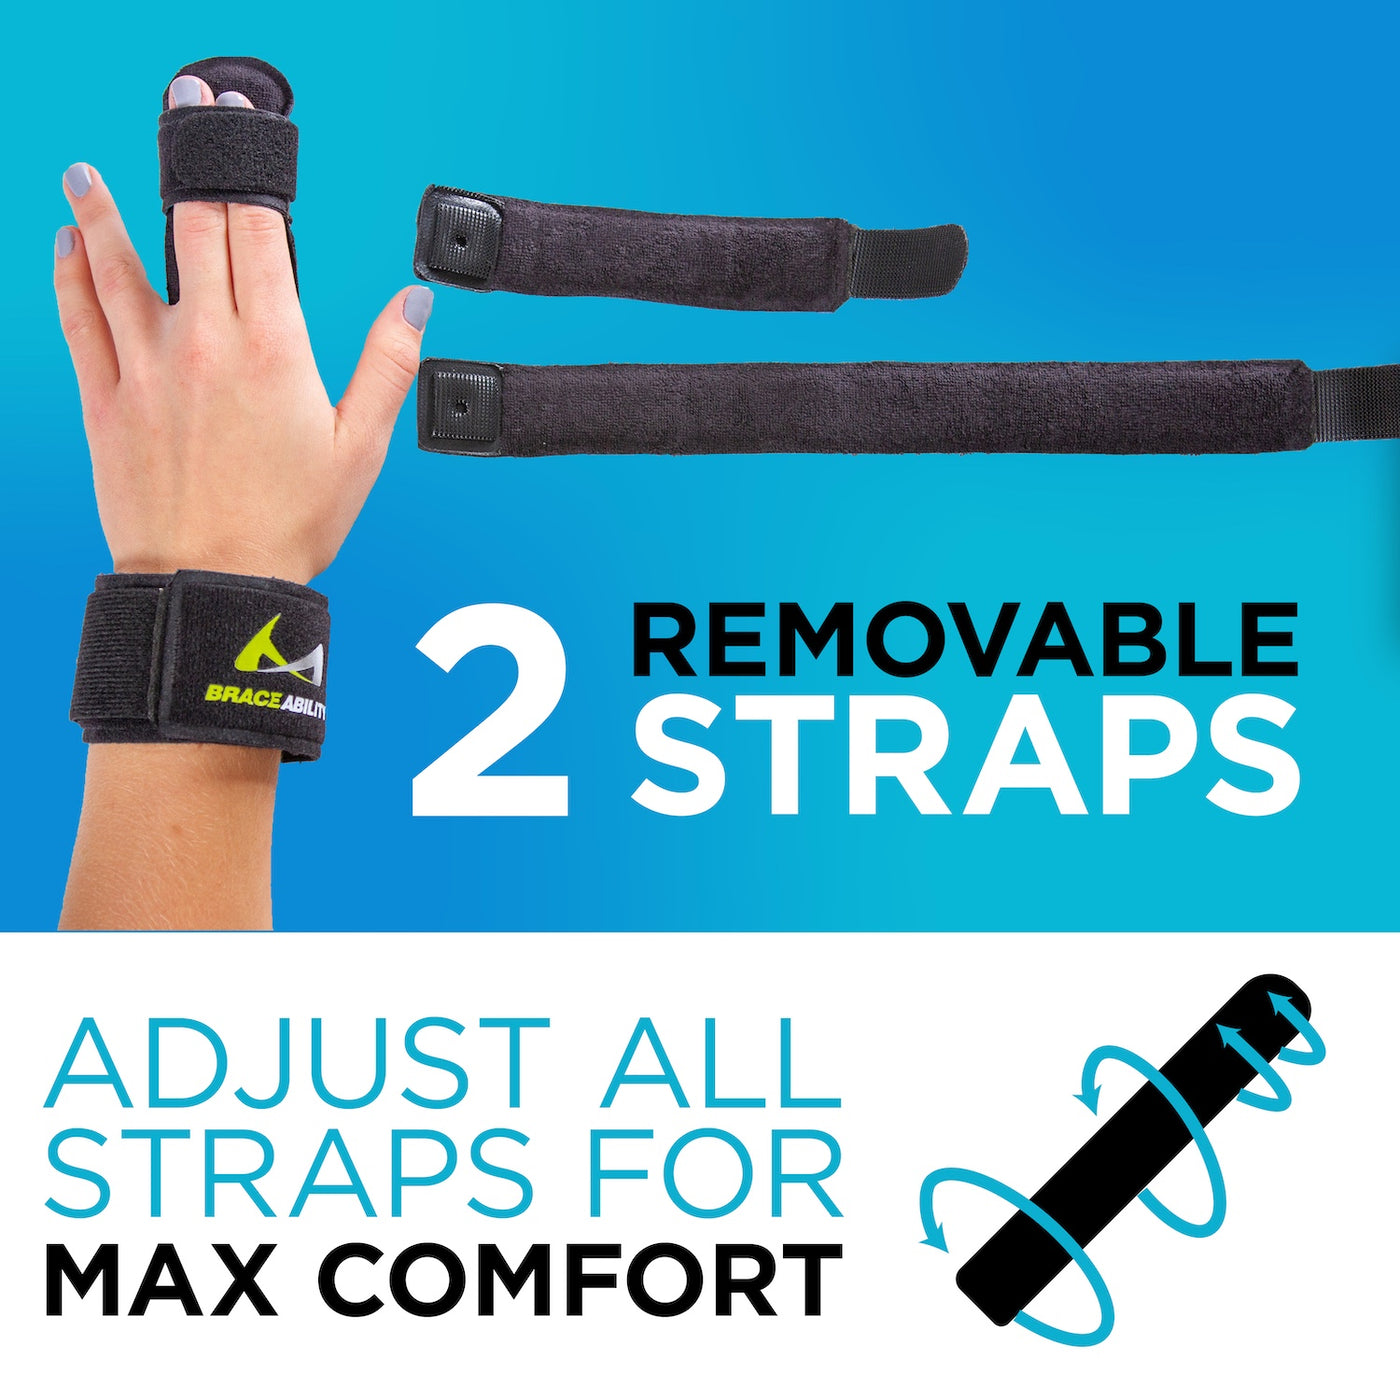 The hand splint and finger immobilizer brace has four adjustable straps for maximum comfort. For an even better fit, two straps are removable